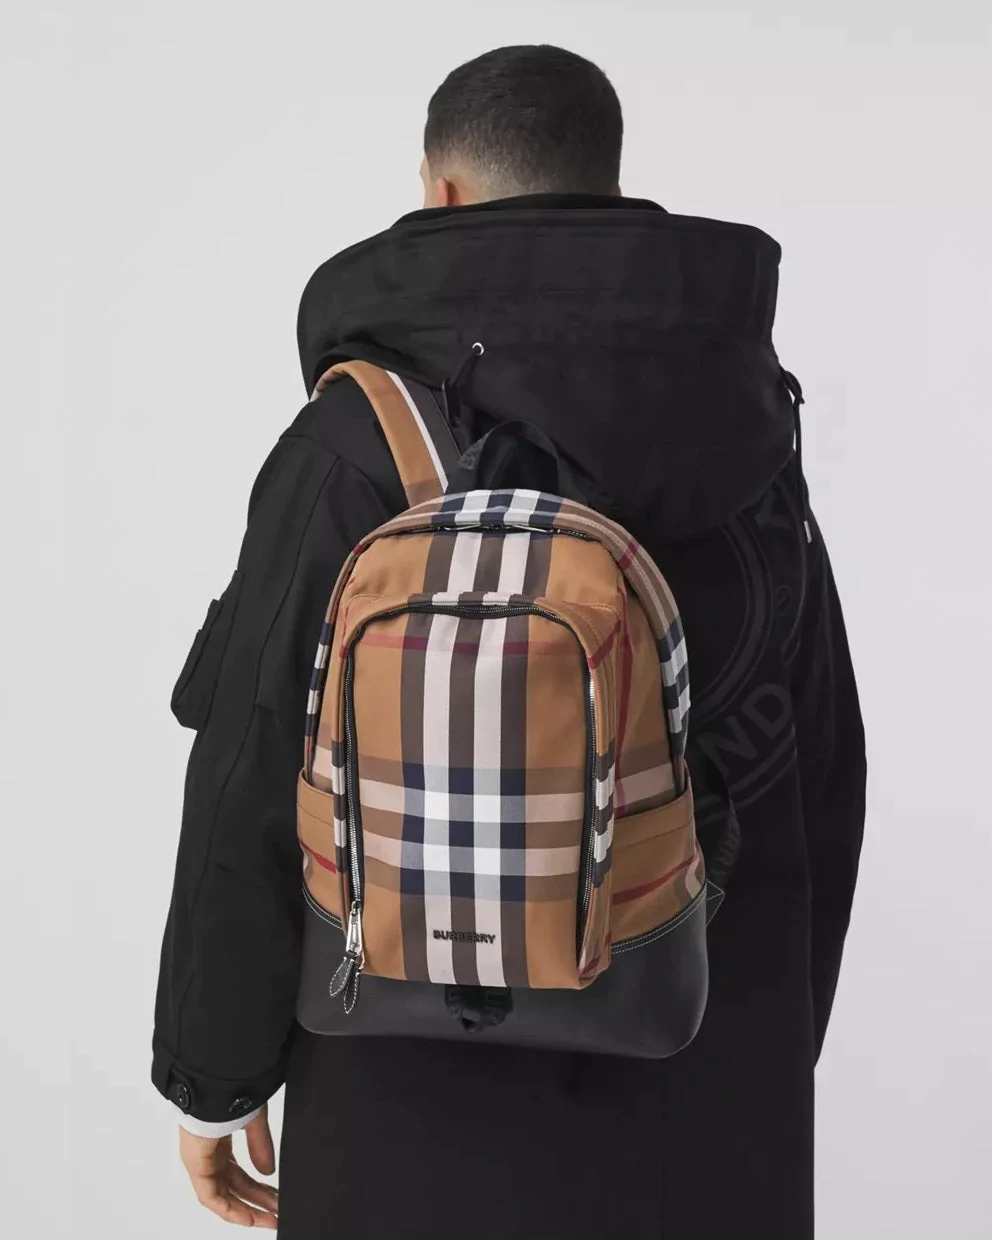 Burberry Large Check Cotton Canvas and Leather Backpack